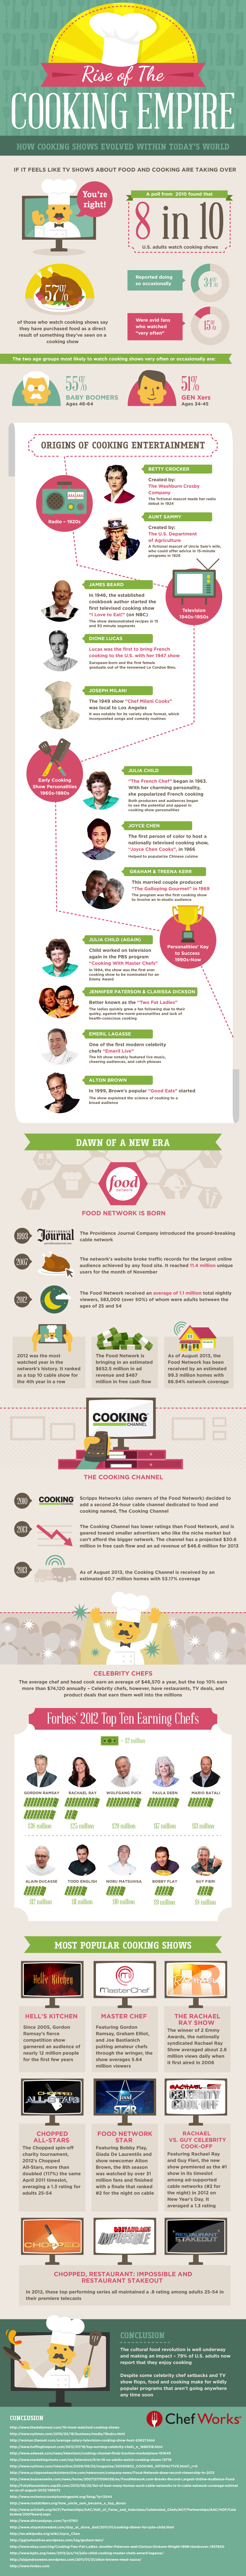 Rise of The Cooking Empire Infographic